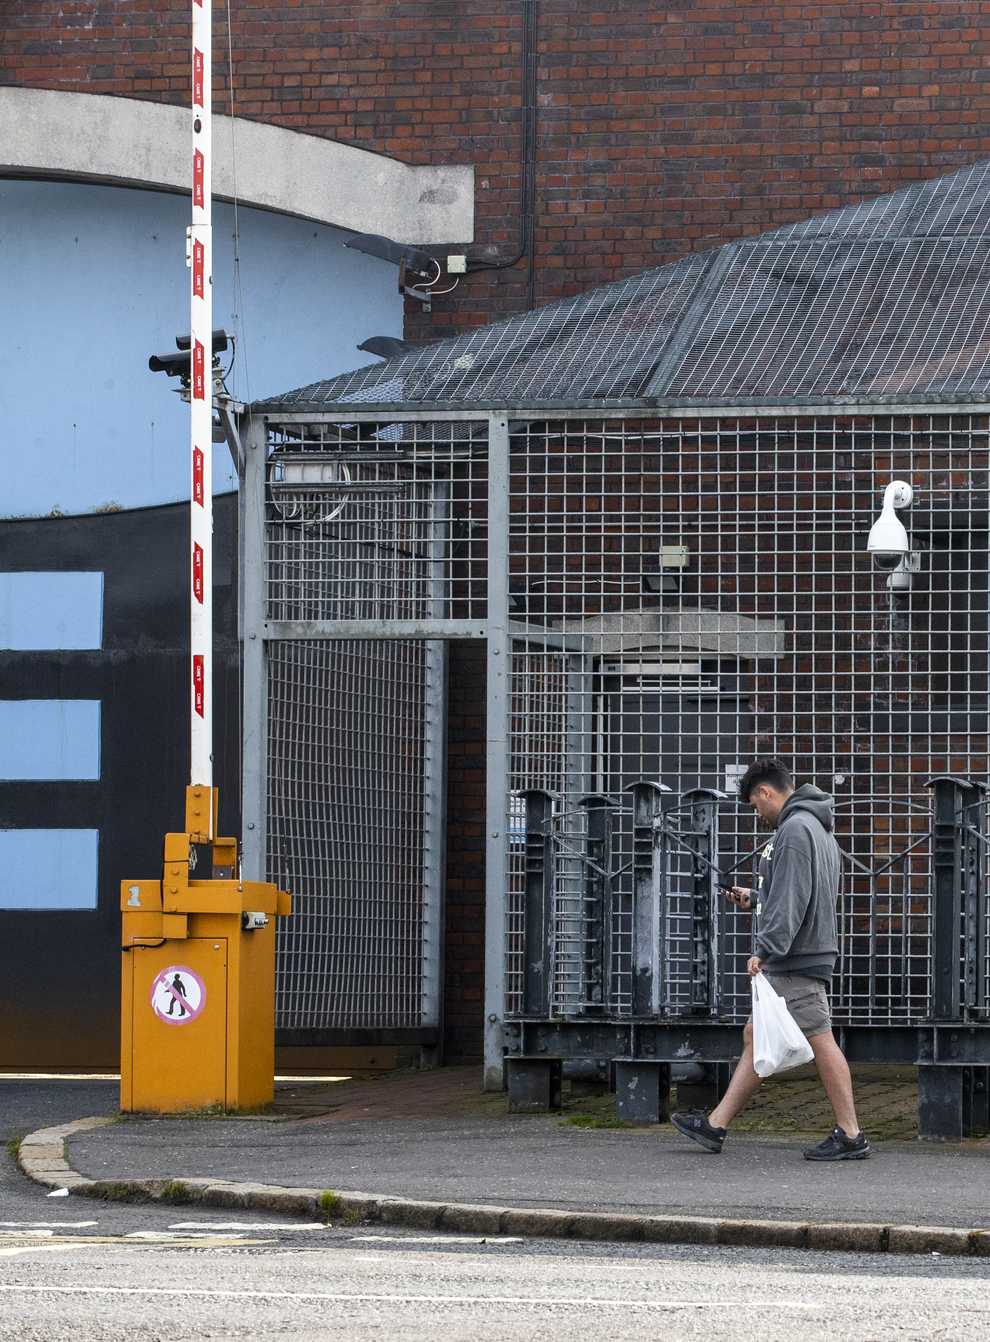 A man walks past Lisburn Road Police Station in south Belfast, as the terrorism threat level in Northern Ireland has been lowered from severe to substantial for the first time in 12 years, Secretary of State Brandon Lewis announced (Liam McBurney/PA)